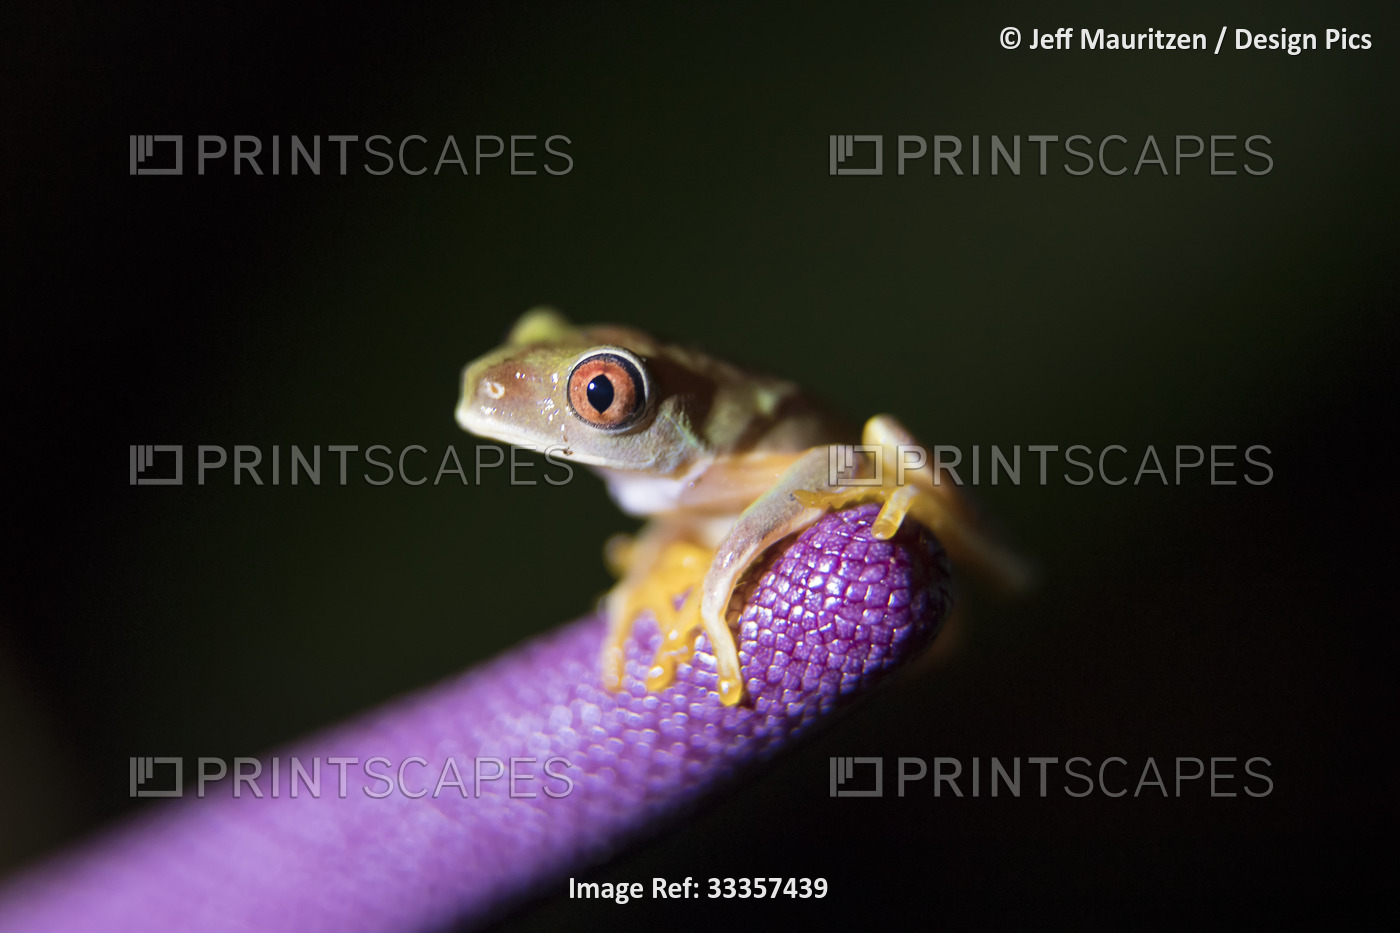 A Red-eyed stream frog or Costa Rica brook frog (Duellmanohyla uranochroa) ...